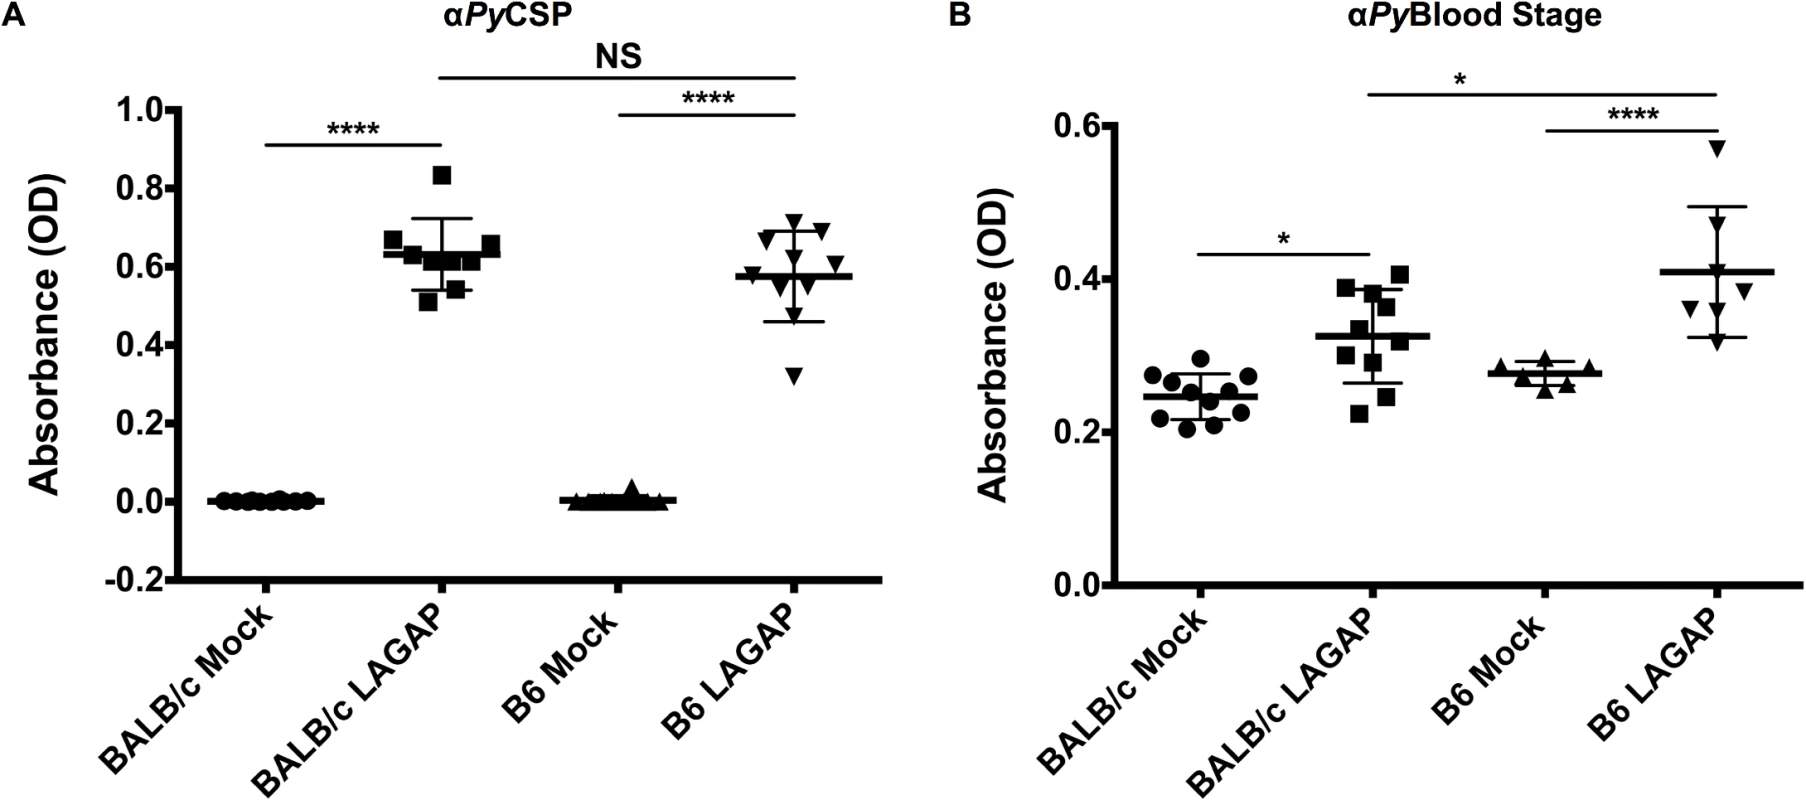 Immunization of C57BL/6 and BALB/cJ mice with LAGAP elicits antibodies against both sporozoites and BS parasites.